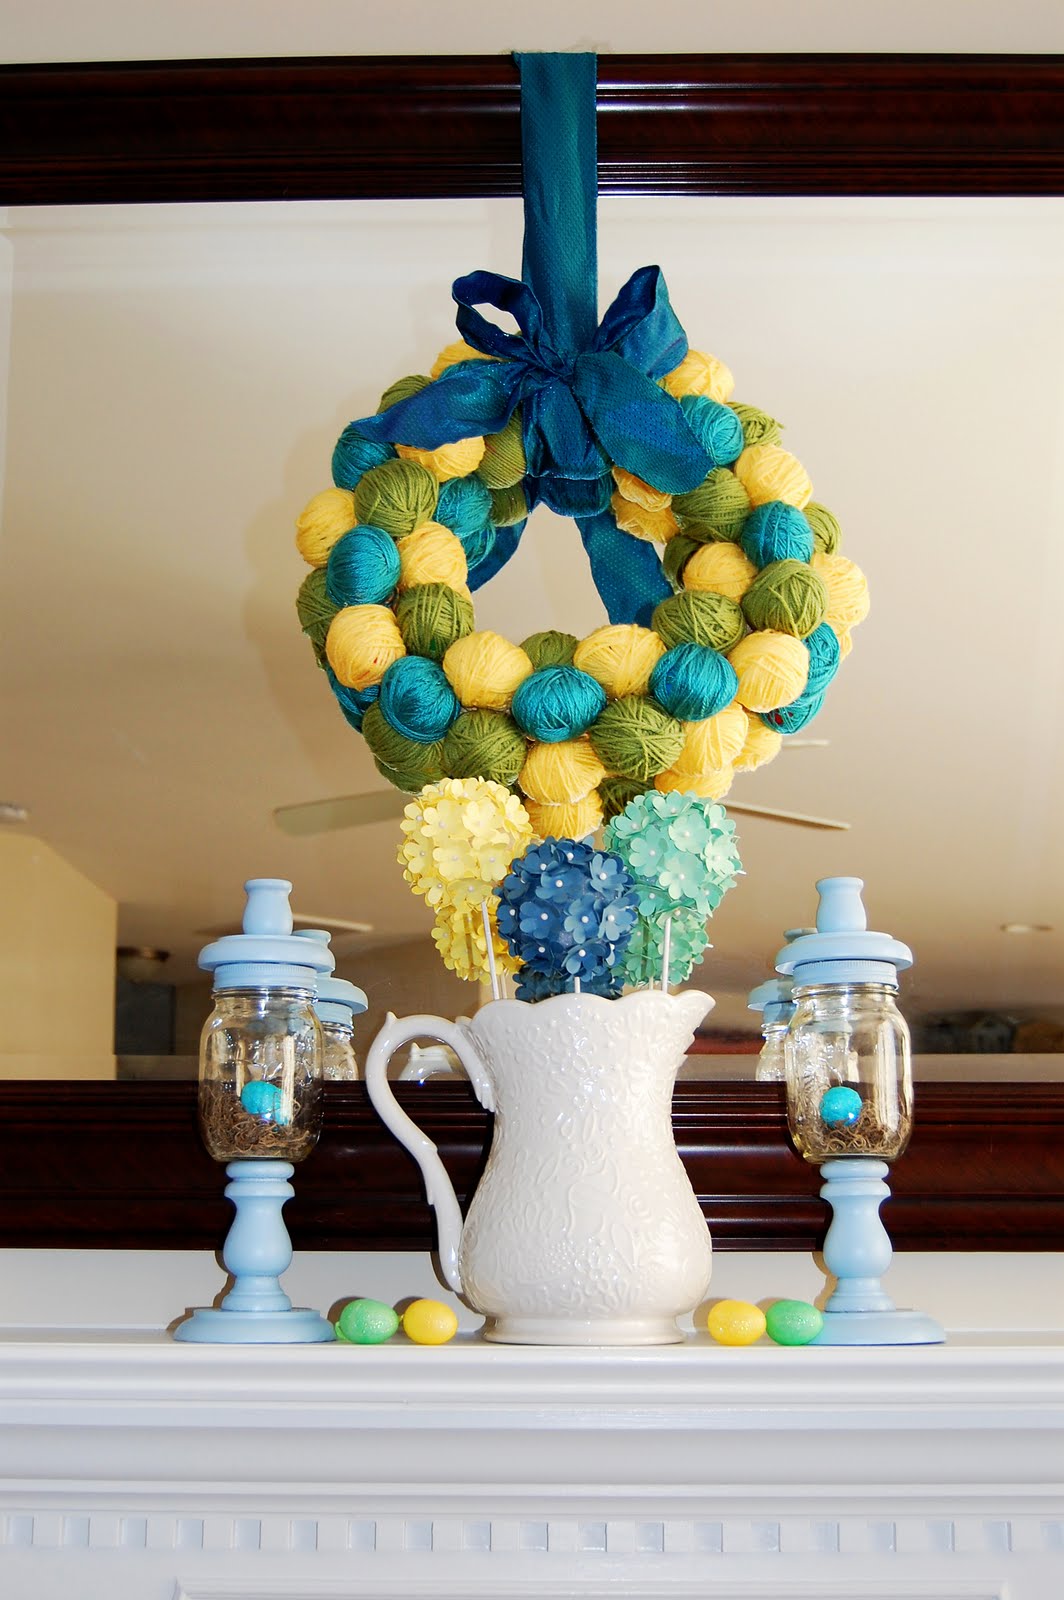 DECORATE-YOUR-HOME-FOR-EASTER-341.